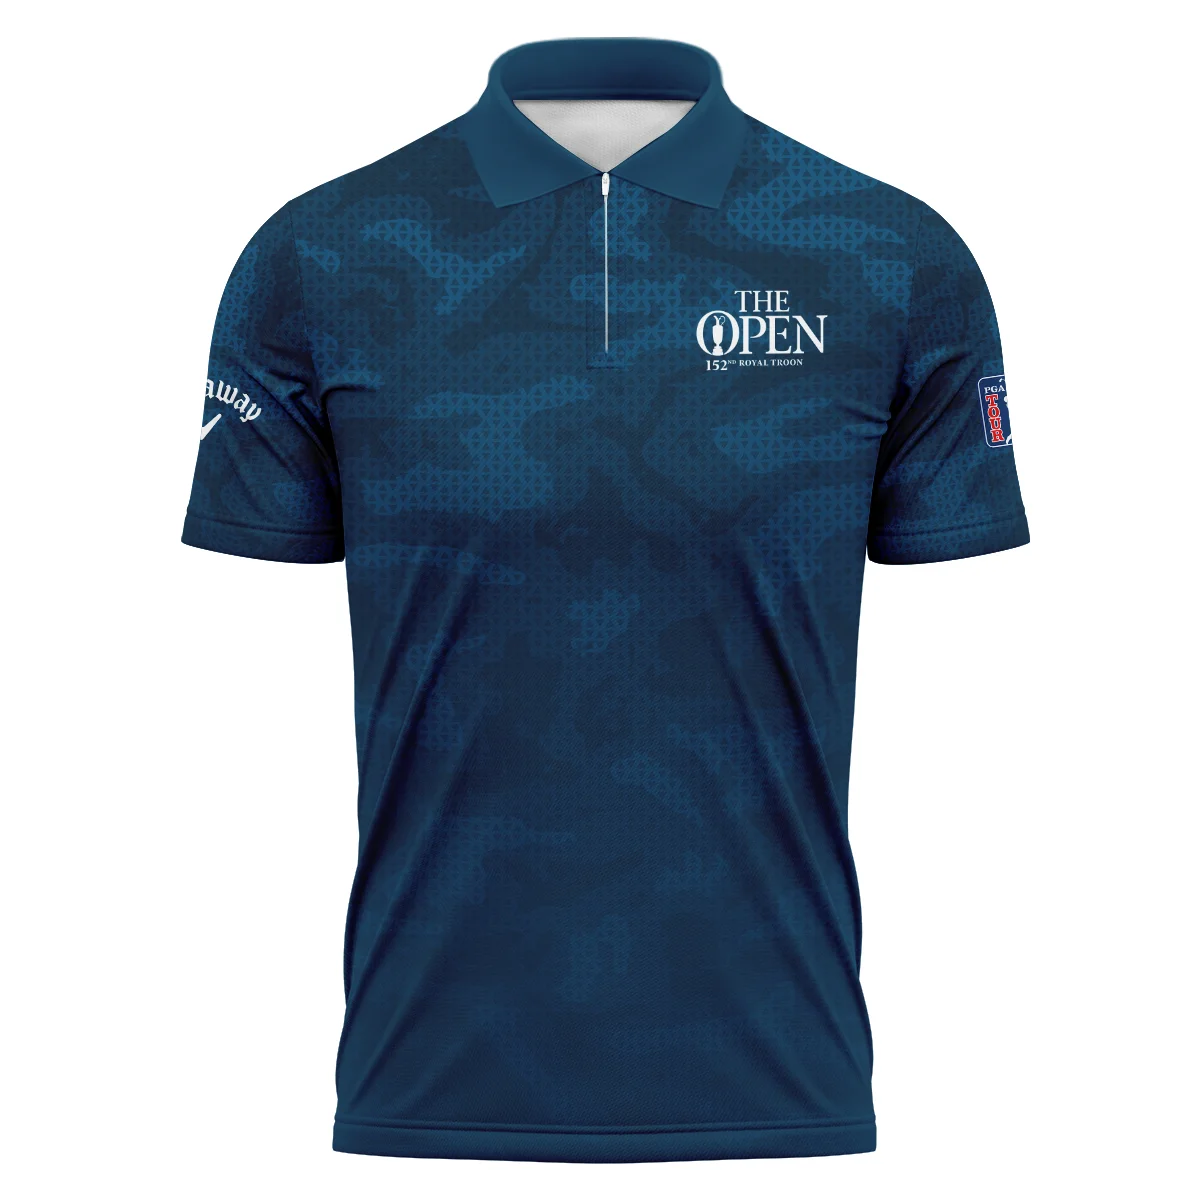 Callaway 152nd Open Championship Dark Blue Abstract Background Zipper Polo Shirt All Over Prints HOTOP260624A02CLWZPL